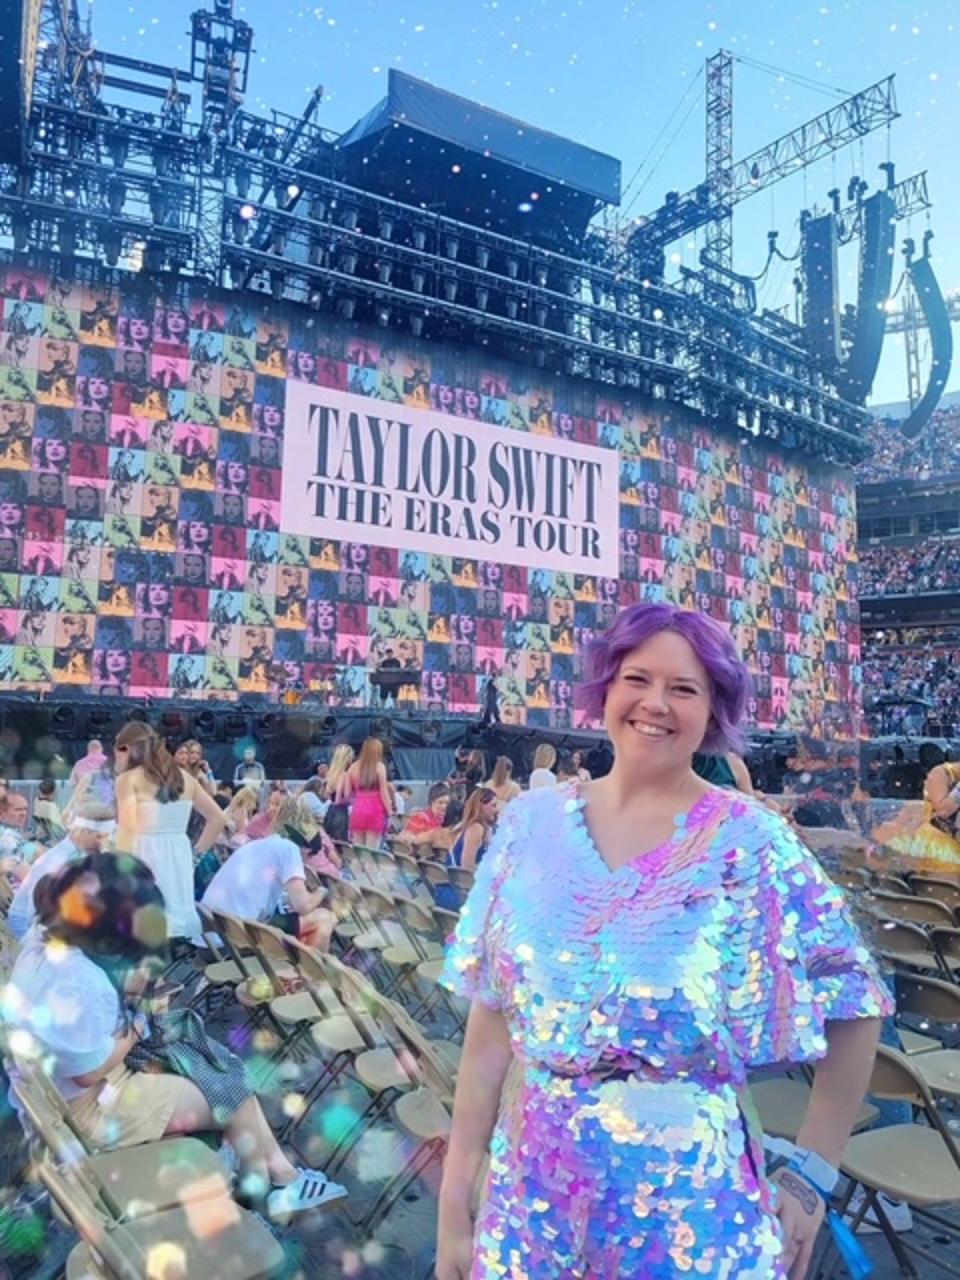 Abigail Rose King, 29, of Salt Lake City, has been ranked in the top .001% of Taylor Swift listeners by Spotify Wrapped for three years in a row (Abigail Rose King)